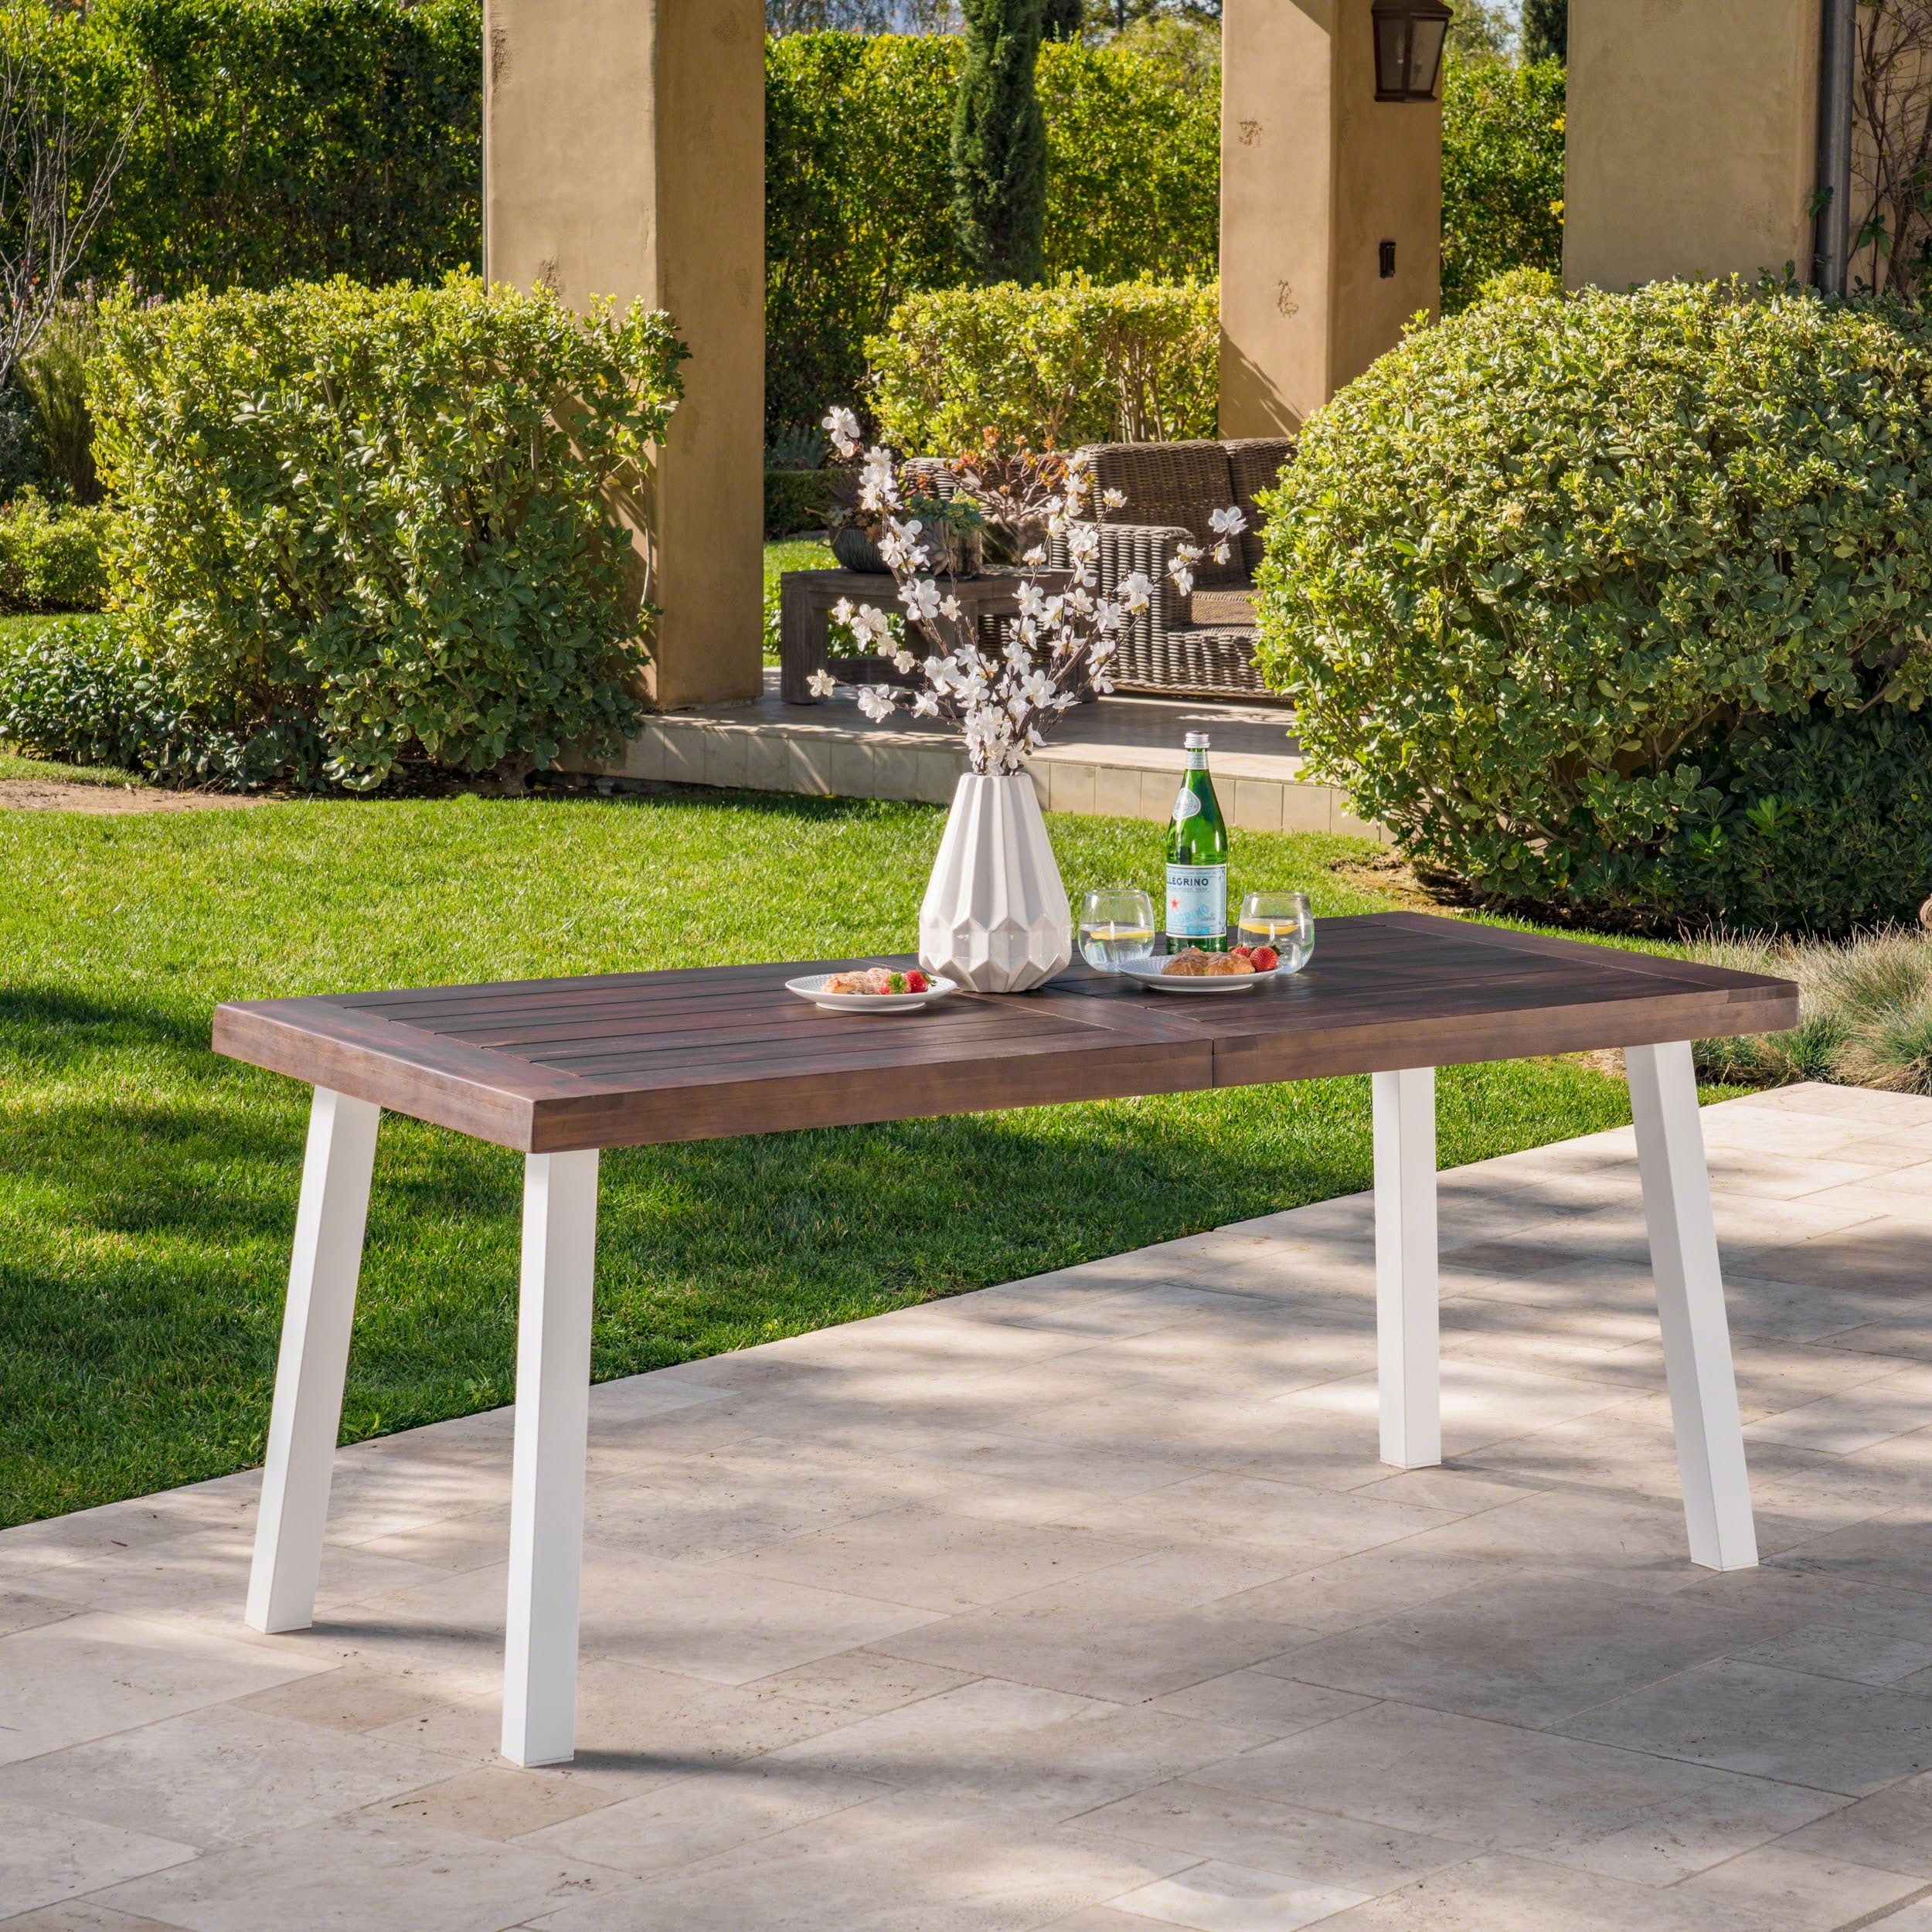 Black and Teak Finish Christopher Knight Home Tamia Outdoor 59 Acacia Wood and Iron Dining Table 